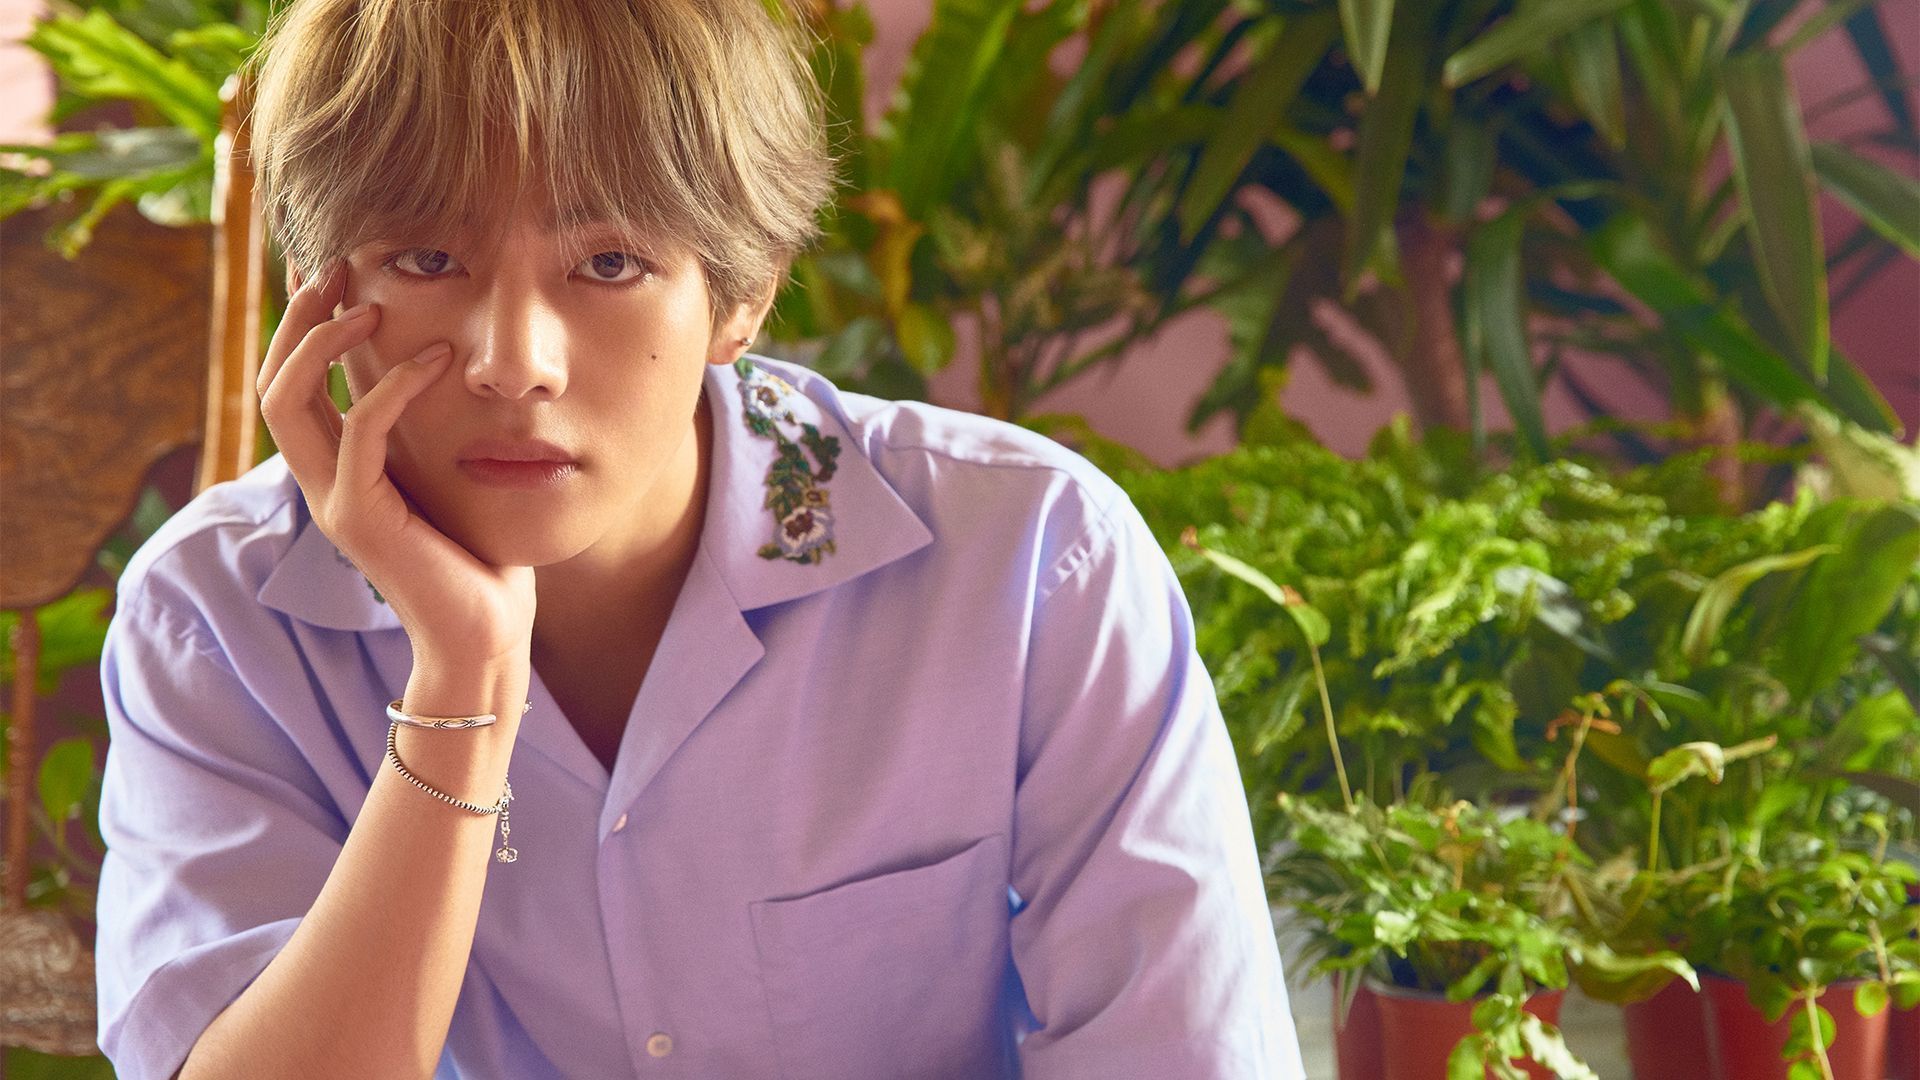 Kim Taehyung Wallpaper Desktop is HD wallpaper & background for desktop or mobile device. To find more wallpaper on Itl.c. Bts concept photo, Photo l, Taehyung